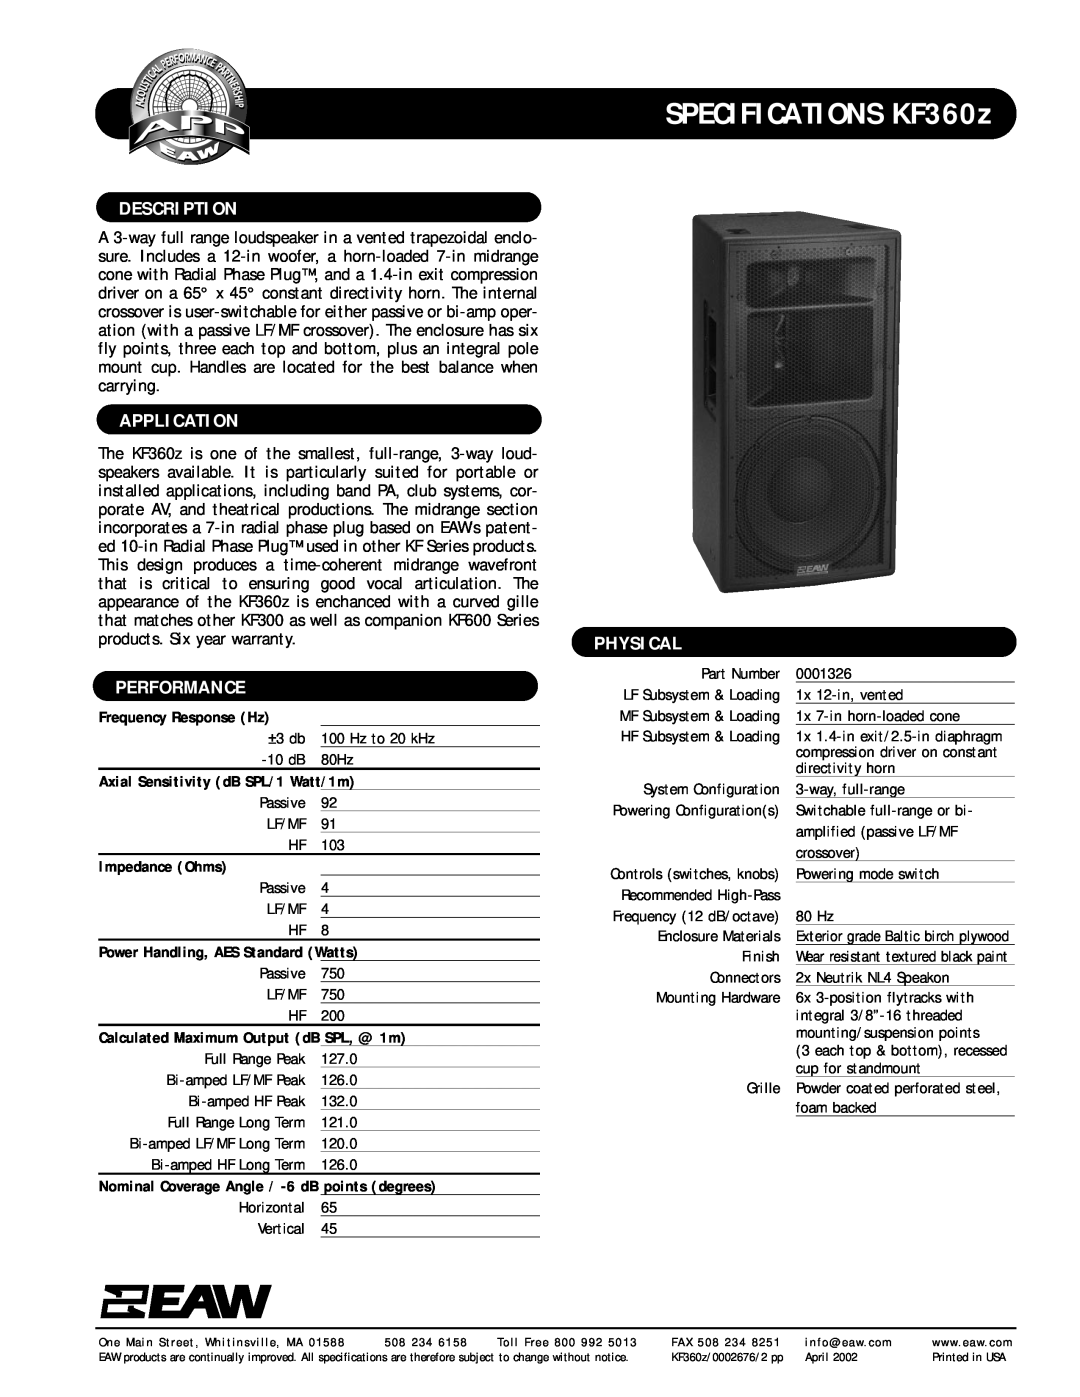 EAW specifications SPECIFICATIONS KF360z, Description, Application, Performance, Physical 